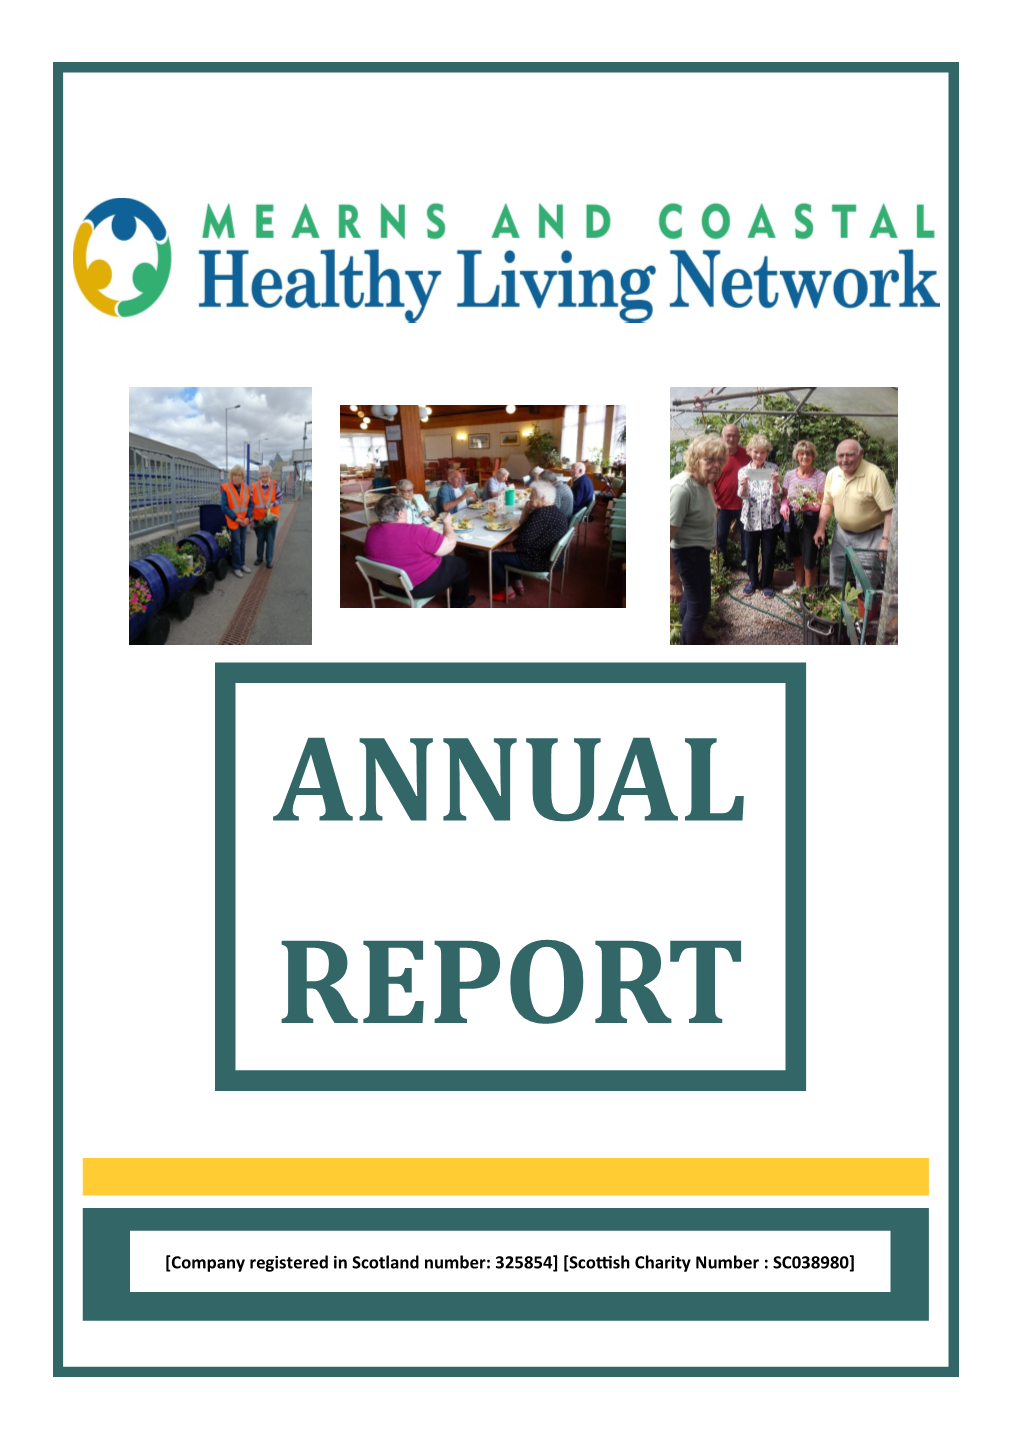 Our 2020-21 Annual Report